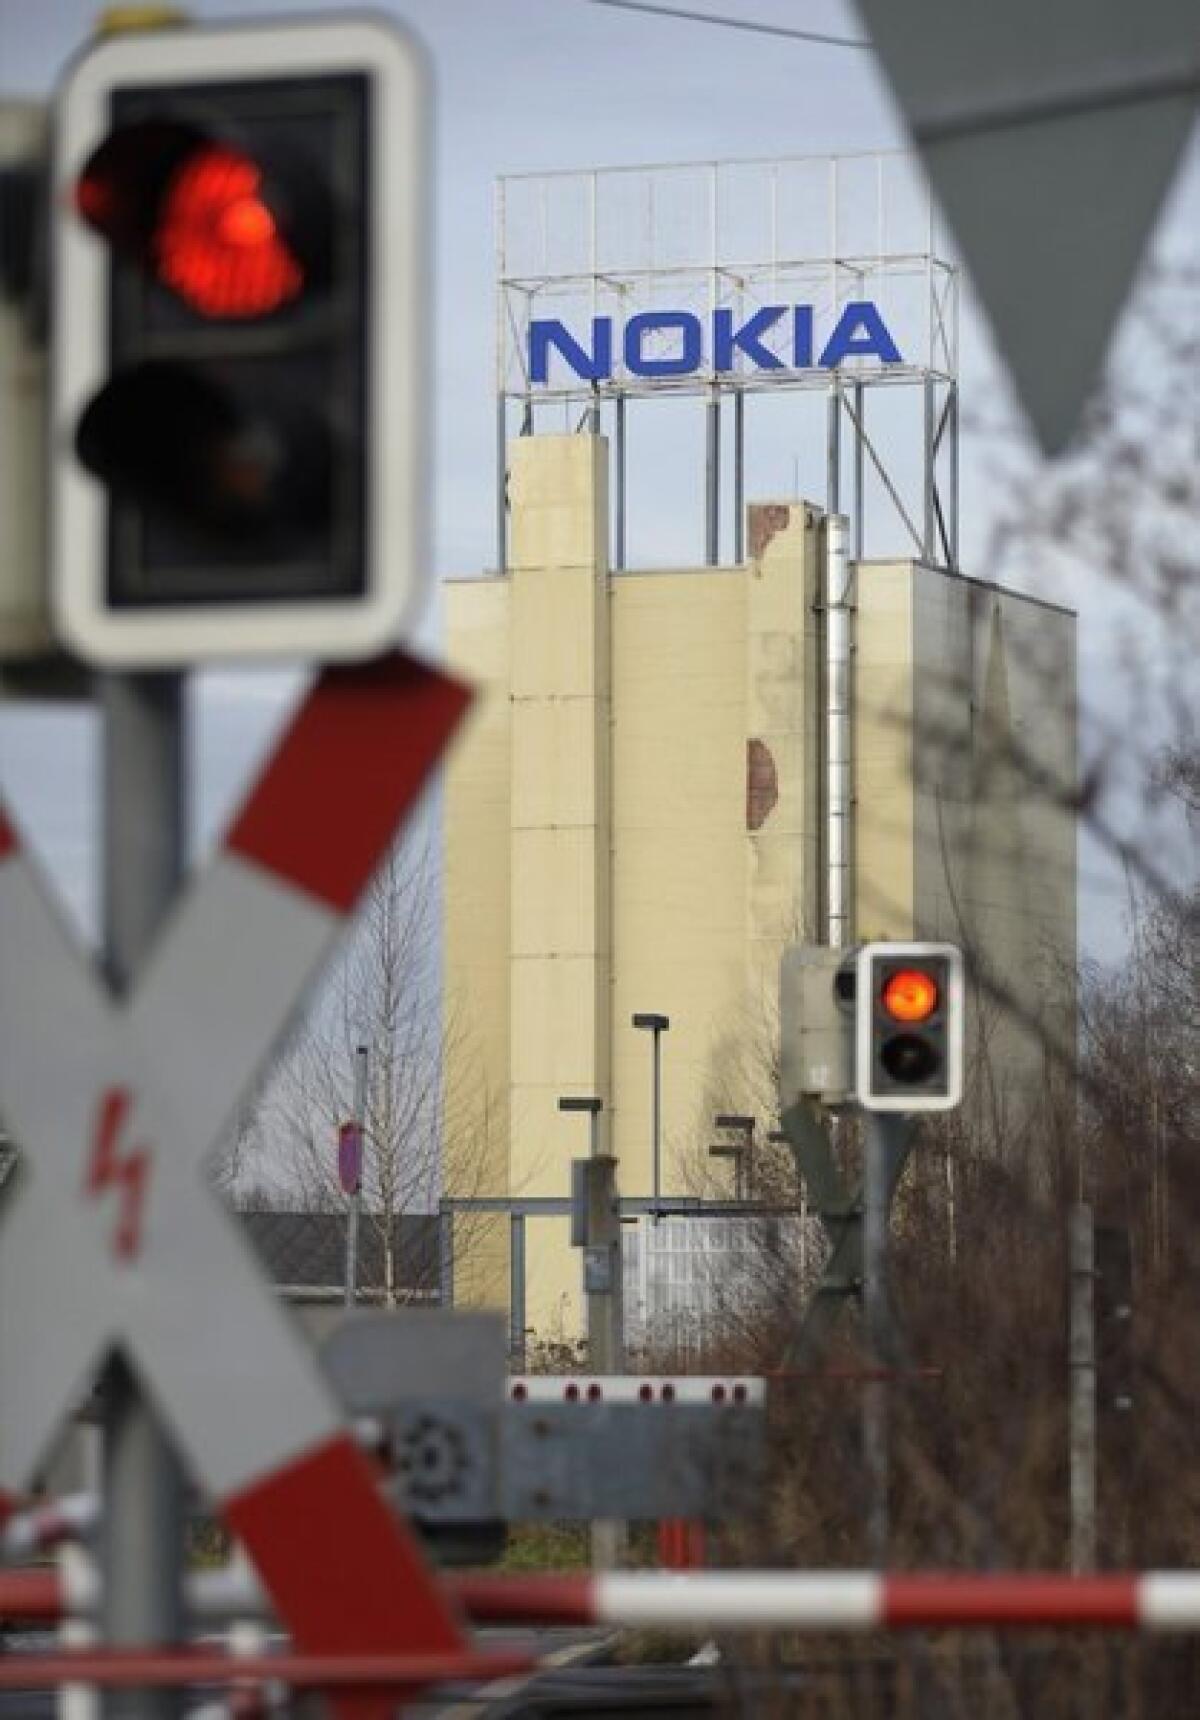 Finnish mobile phone maker Nokia's plant in Bochum, Germany.